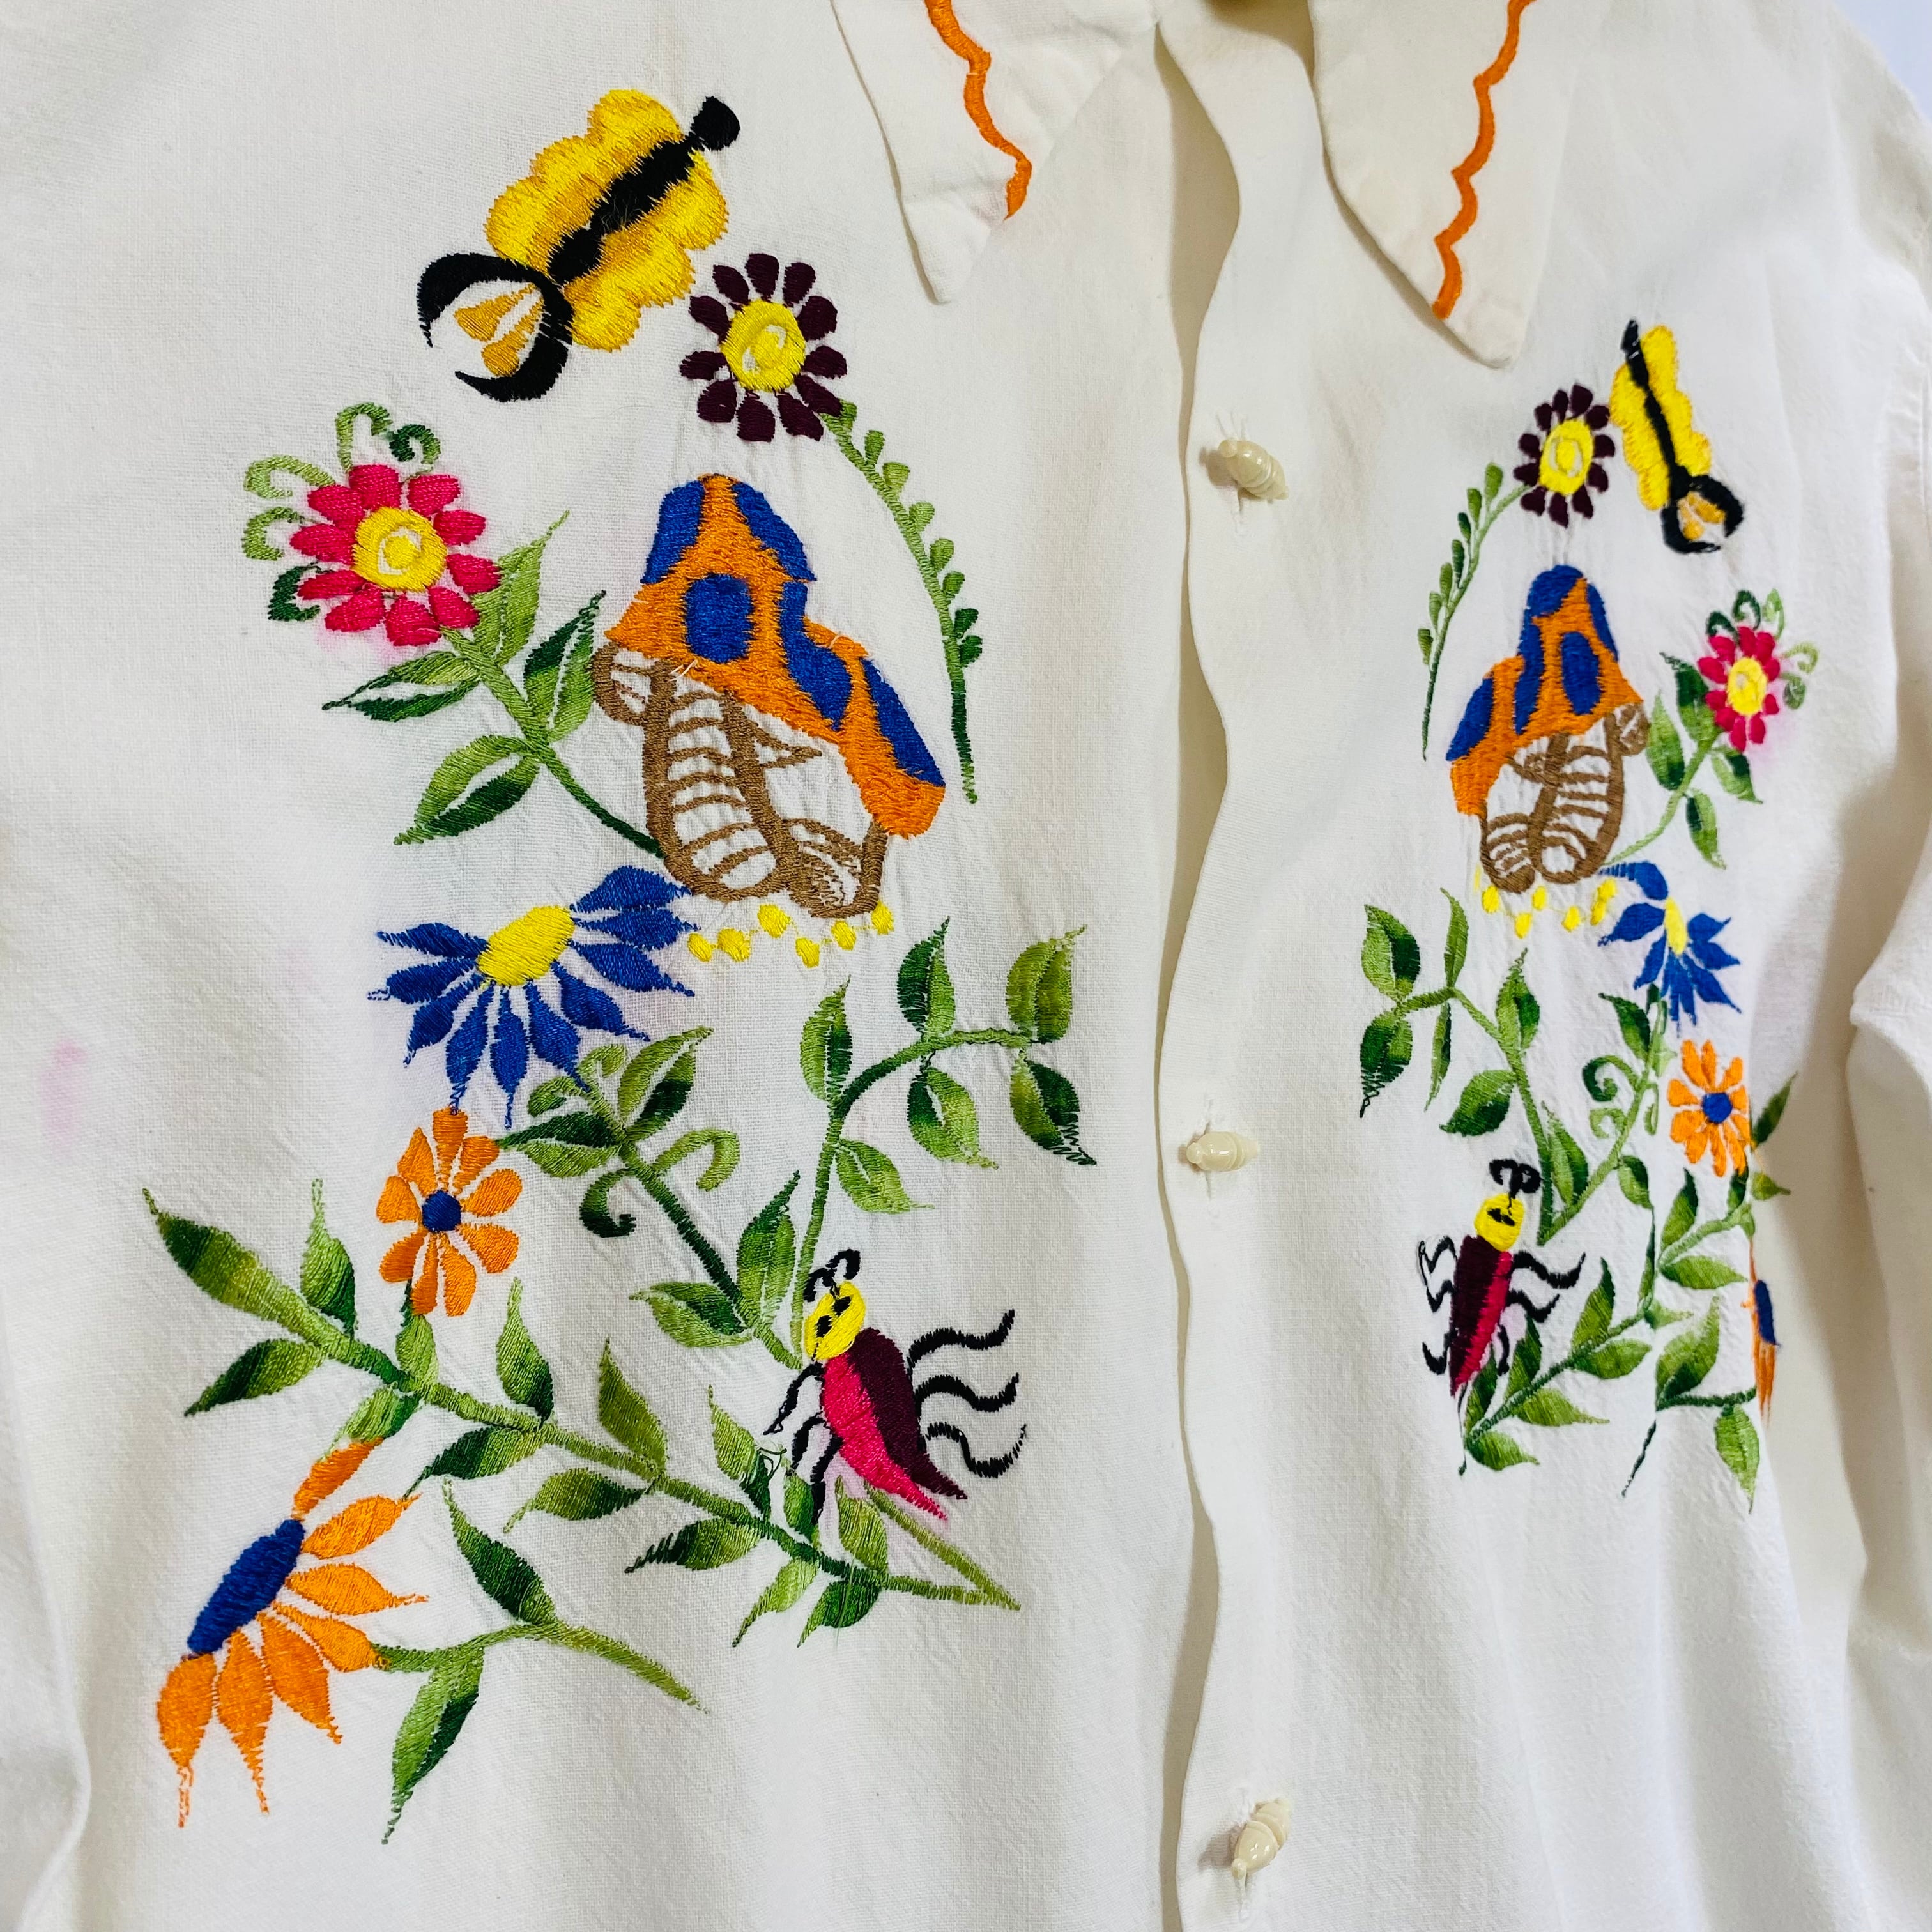 Mexico vintage embroidery shirt ／古着 キノコの花 刺繍 シャツ | GARDEN powered by BASE